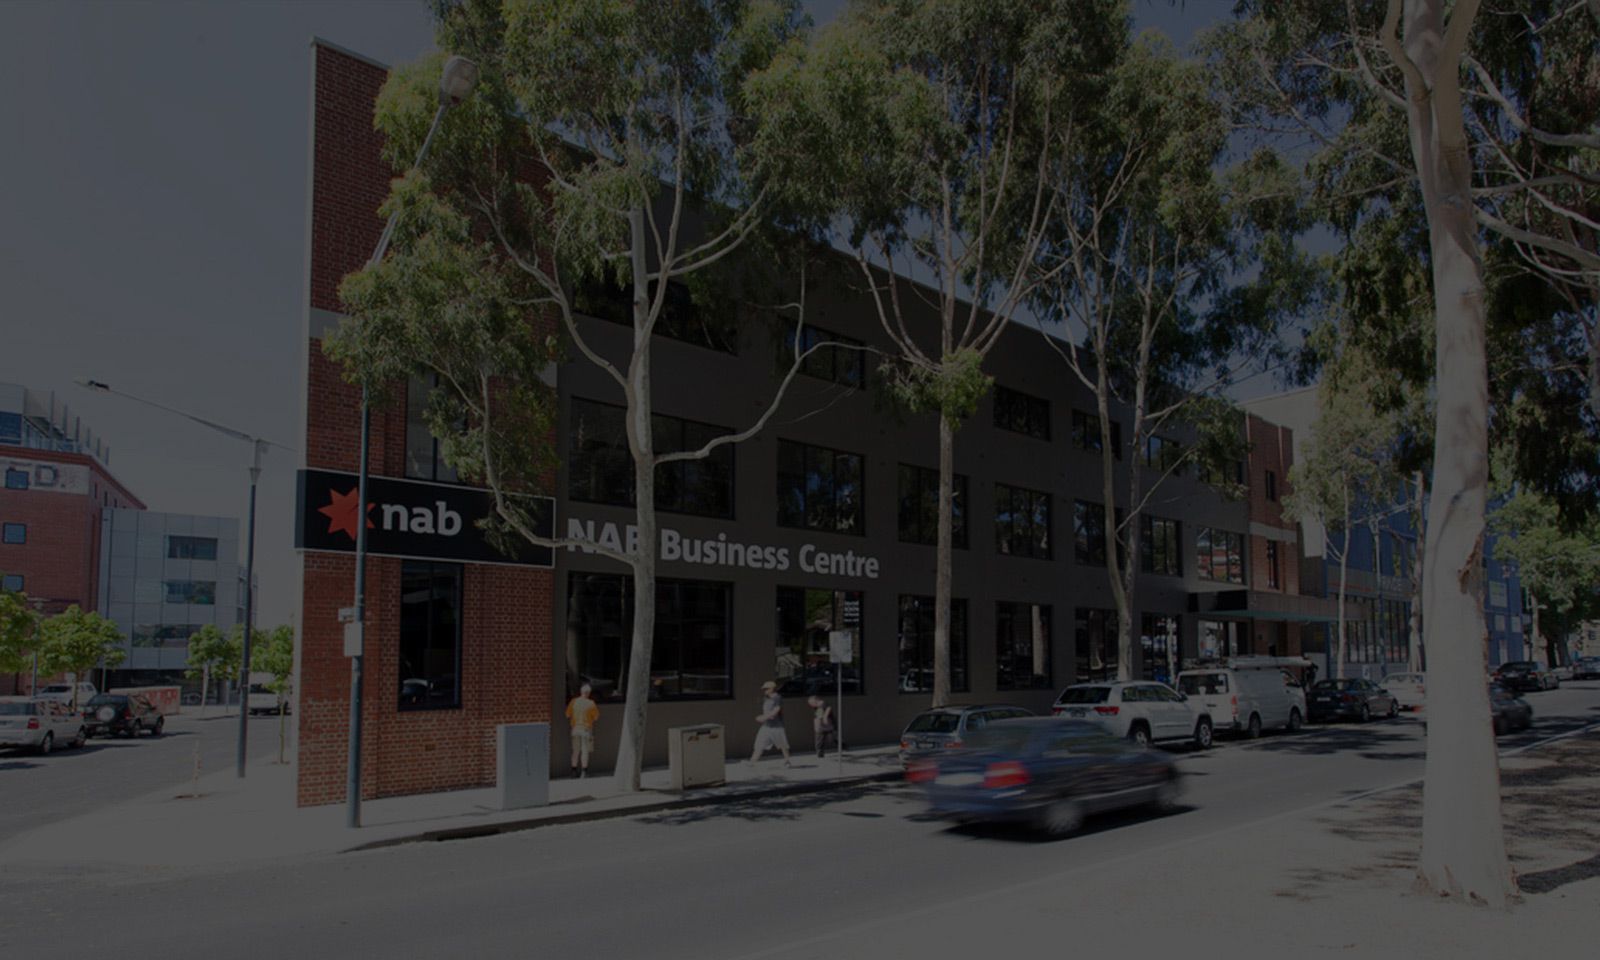 We offer Geelong's most exciting spaces for growing businesses.